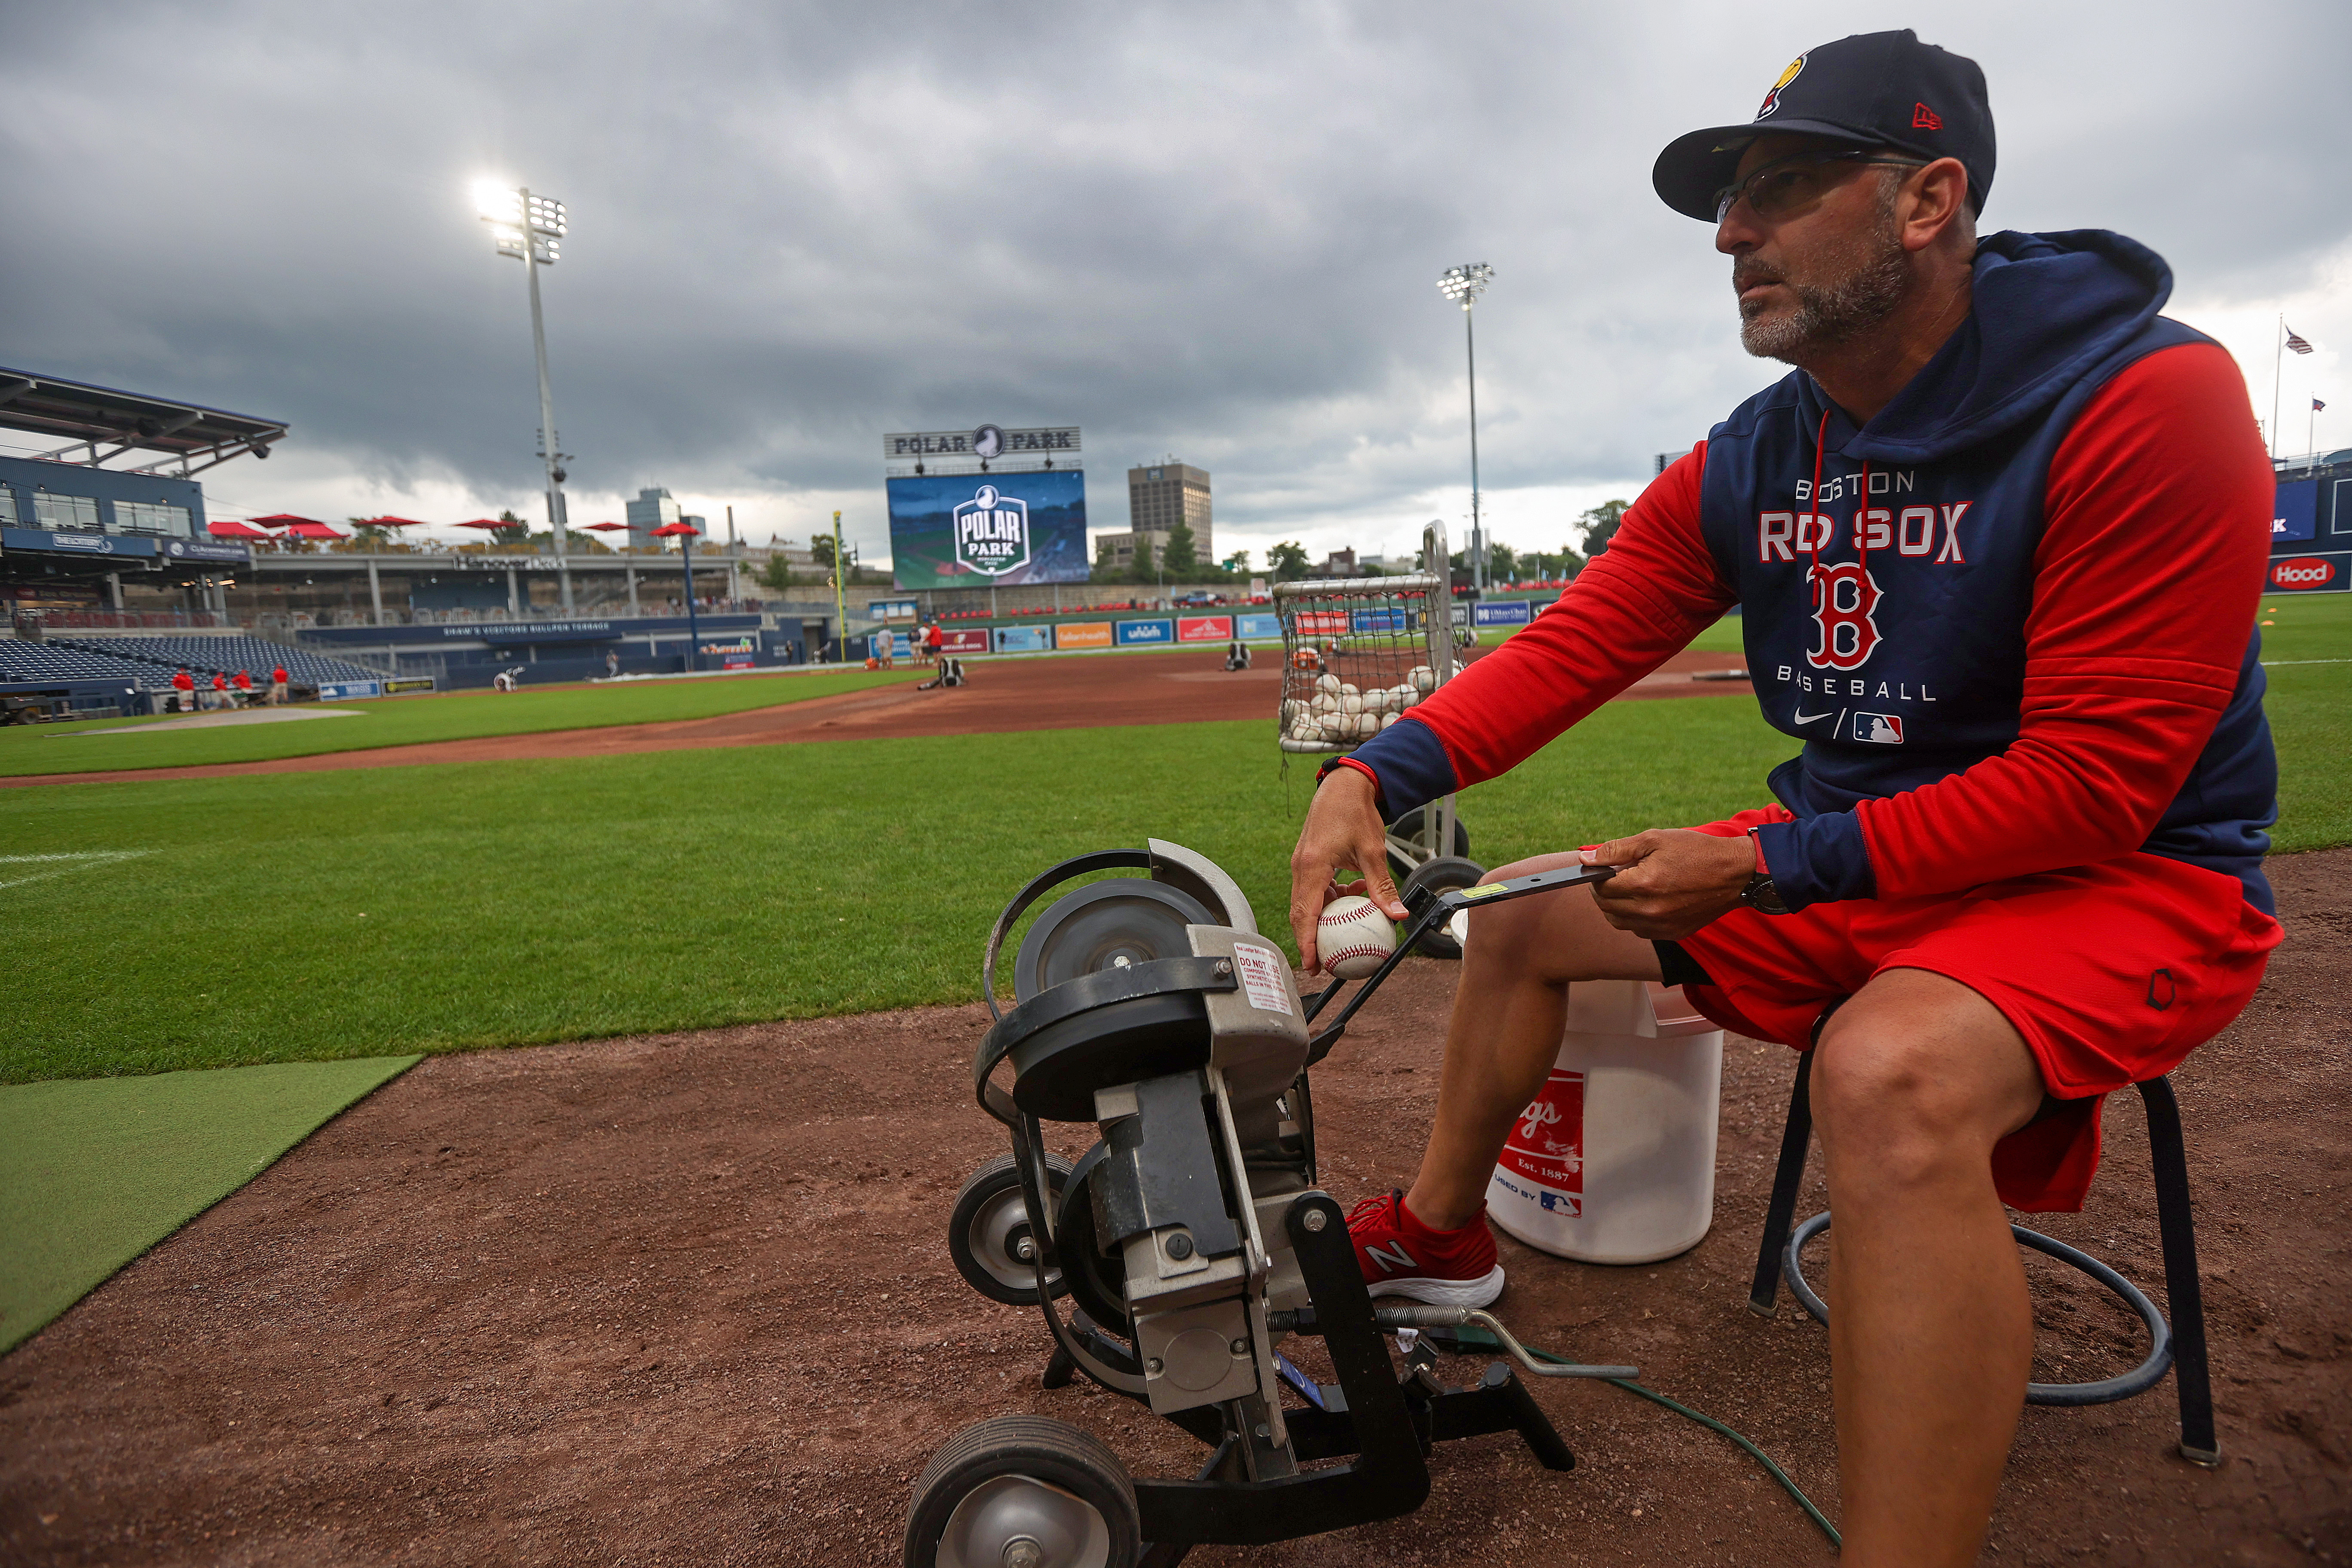 It's been a blast': WooSox players, coaches share thoughts on third season  in Worcester